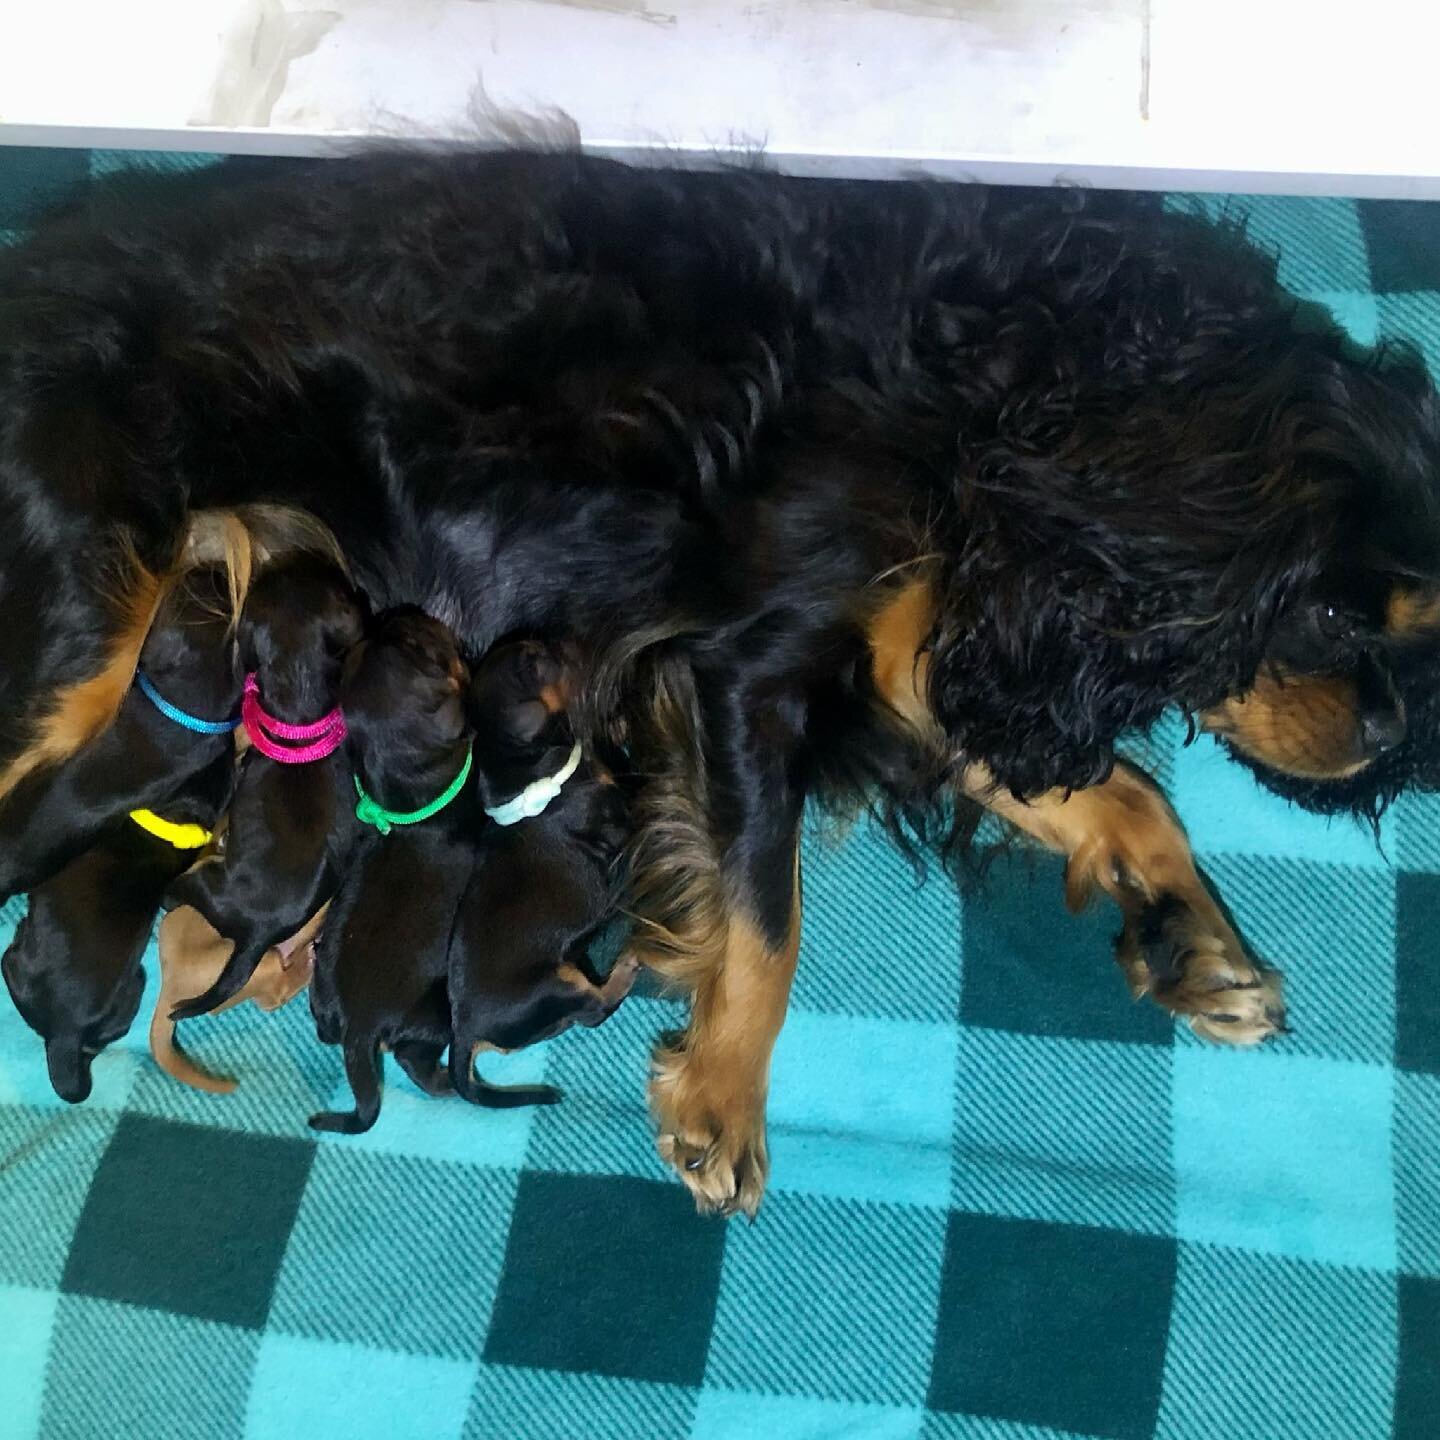 We delivered 6 healthy puppies last night! 3 girls and 3 boys! All of them are Black and Tan like their mother except for one Ruby boy! We are so excited and grateful for their safe arrival! ❤️